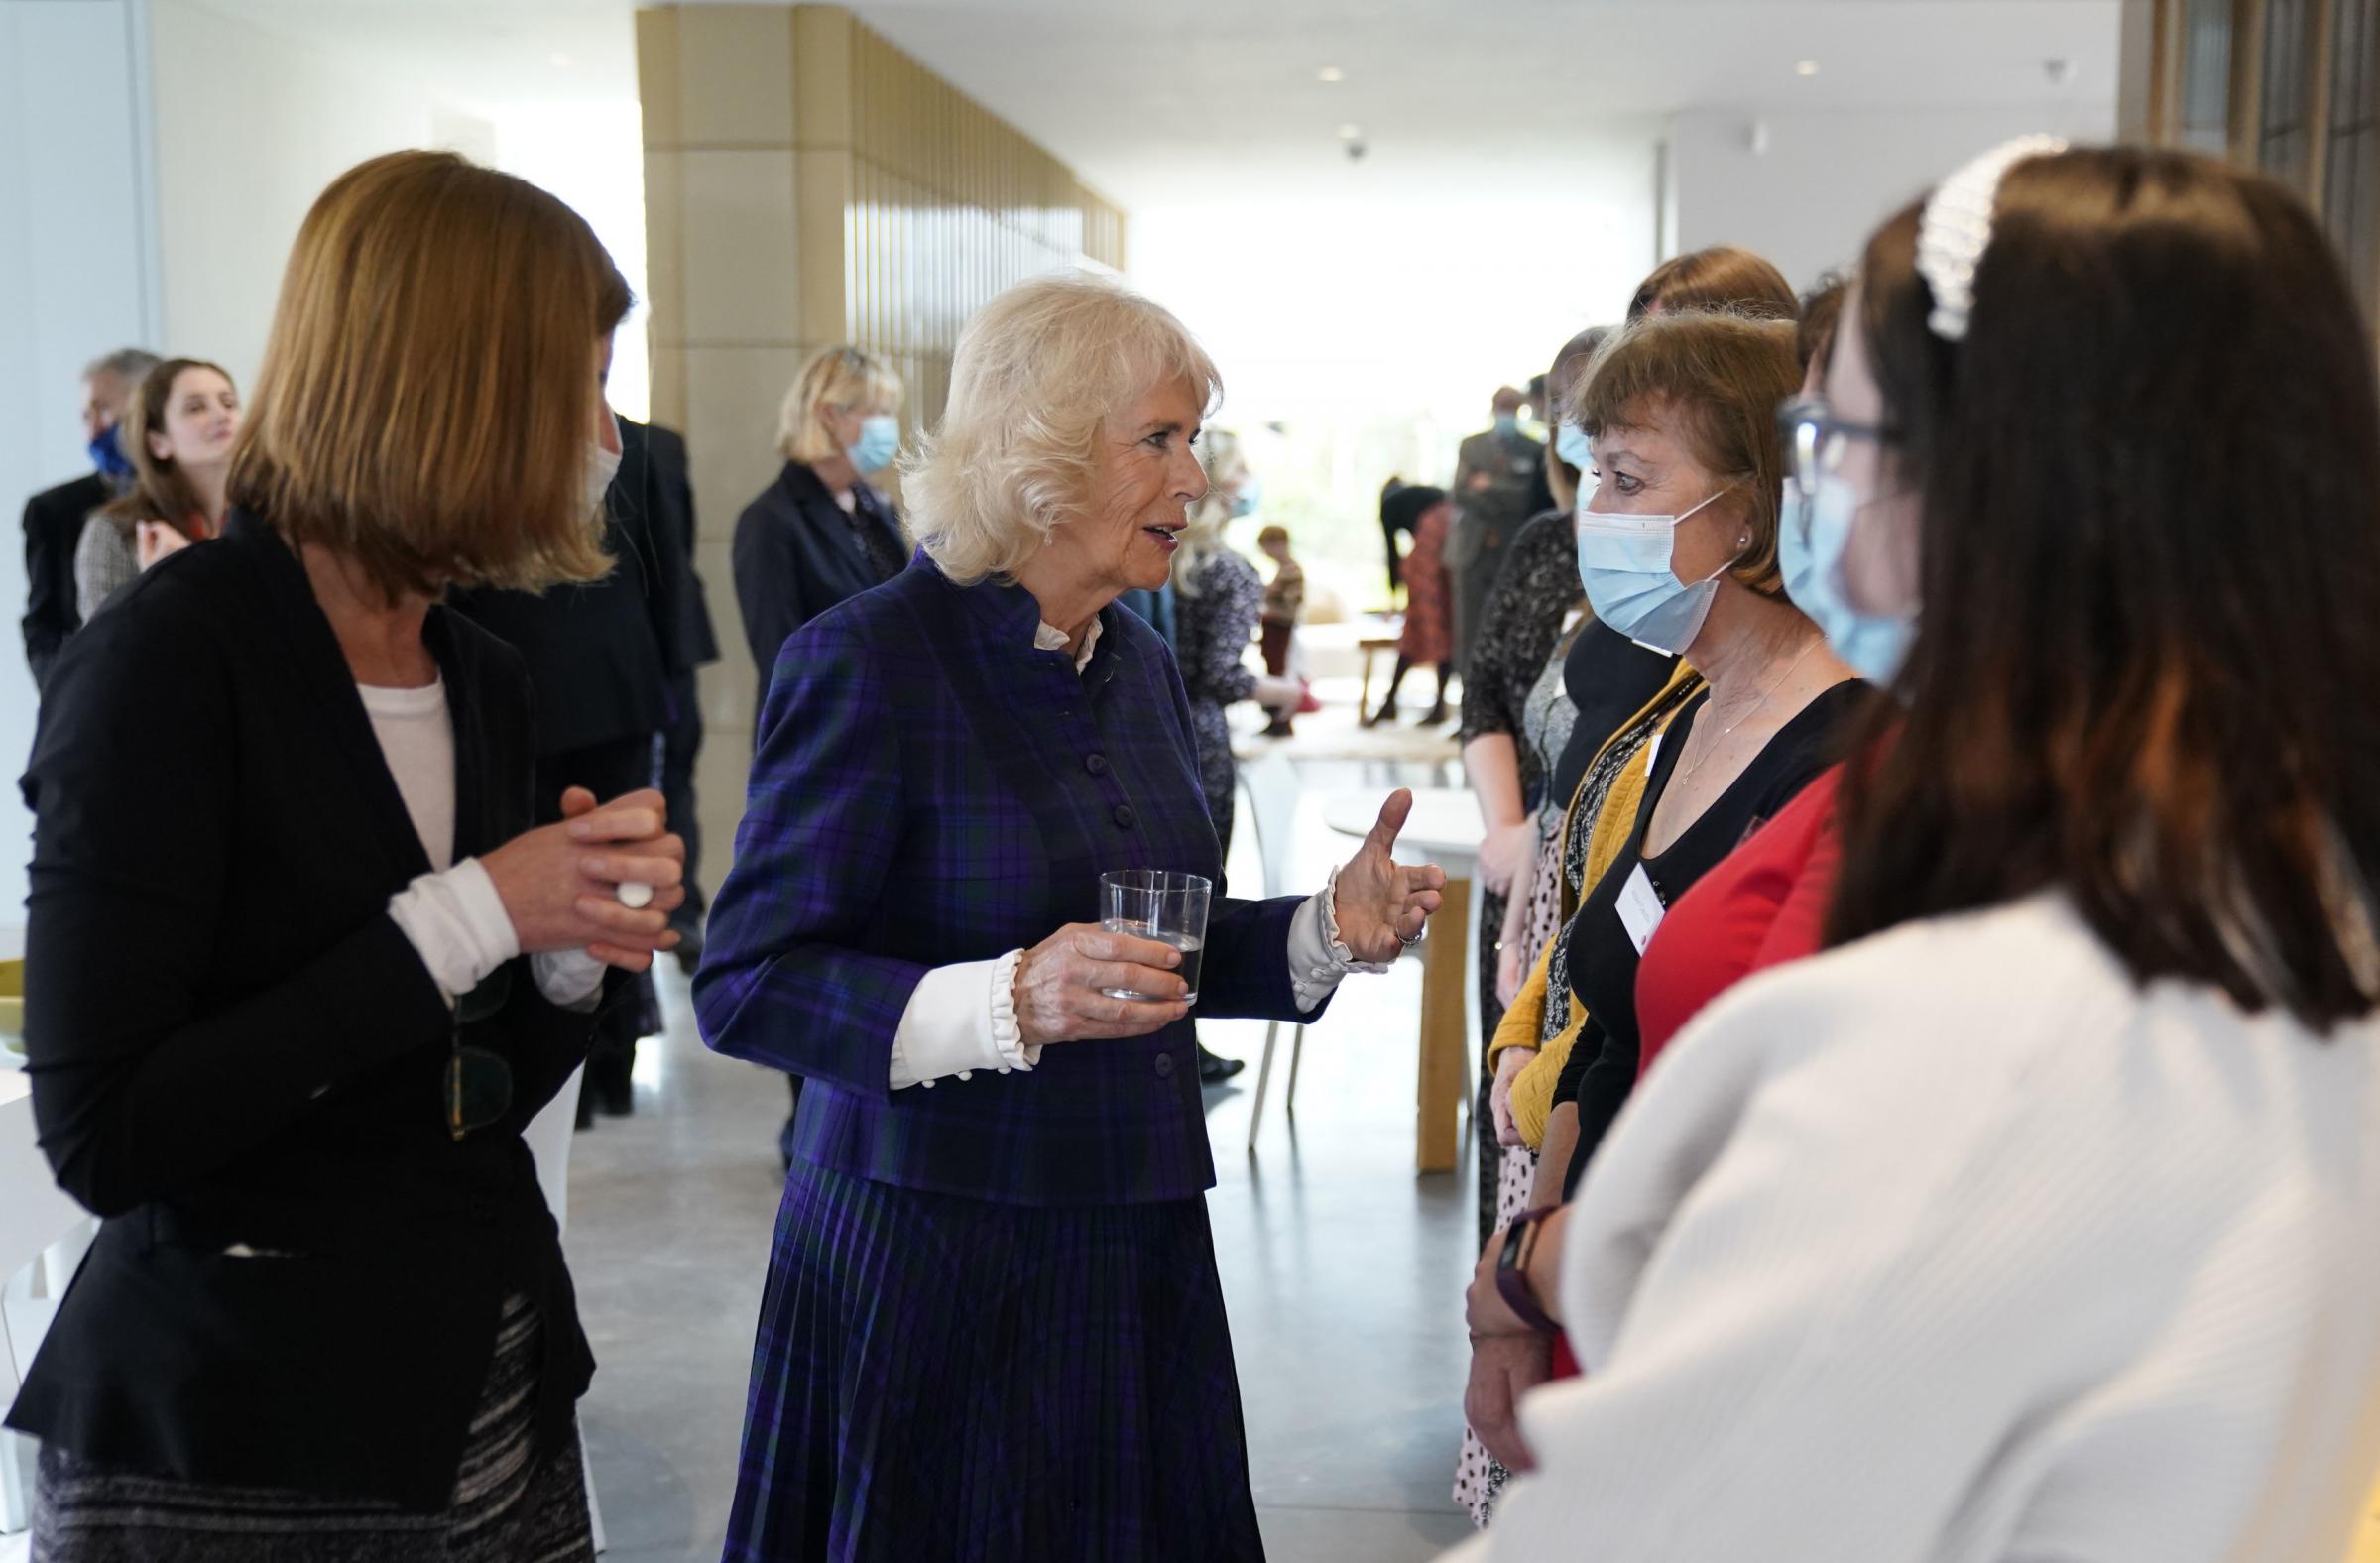 The Duchess of Cornwall during a visit to the charity Maggies Southampton in the grounds of University Hospital Southampton. Picture date: Wednesday April 6, 2022. PA Photo. See PA story ROYAL Camilla. Photo credit should read: Andrew Matthews/PA Wire.